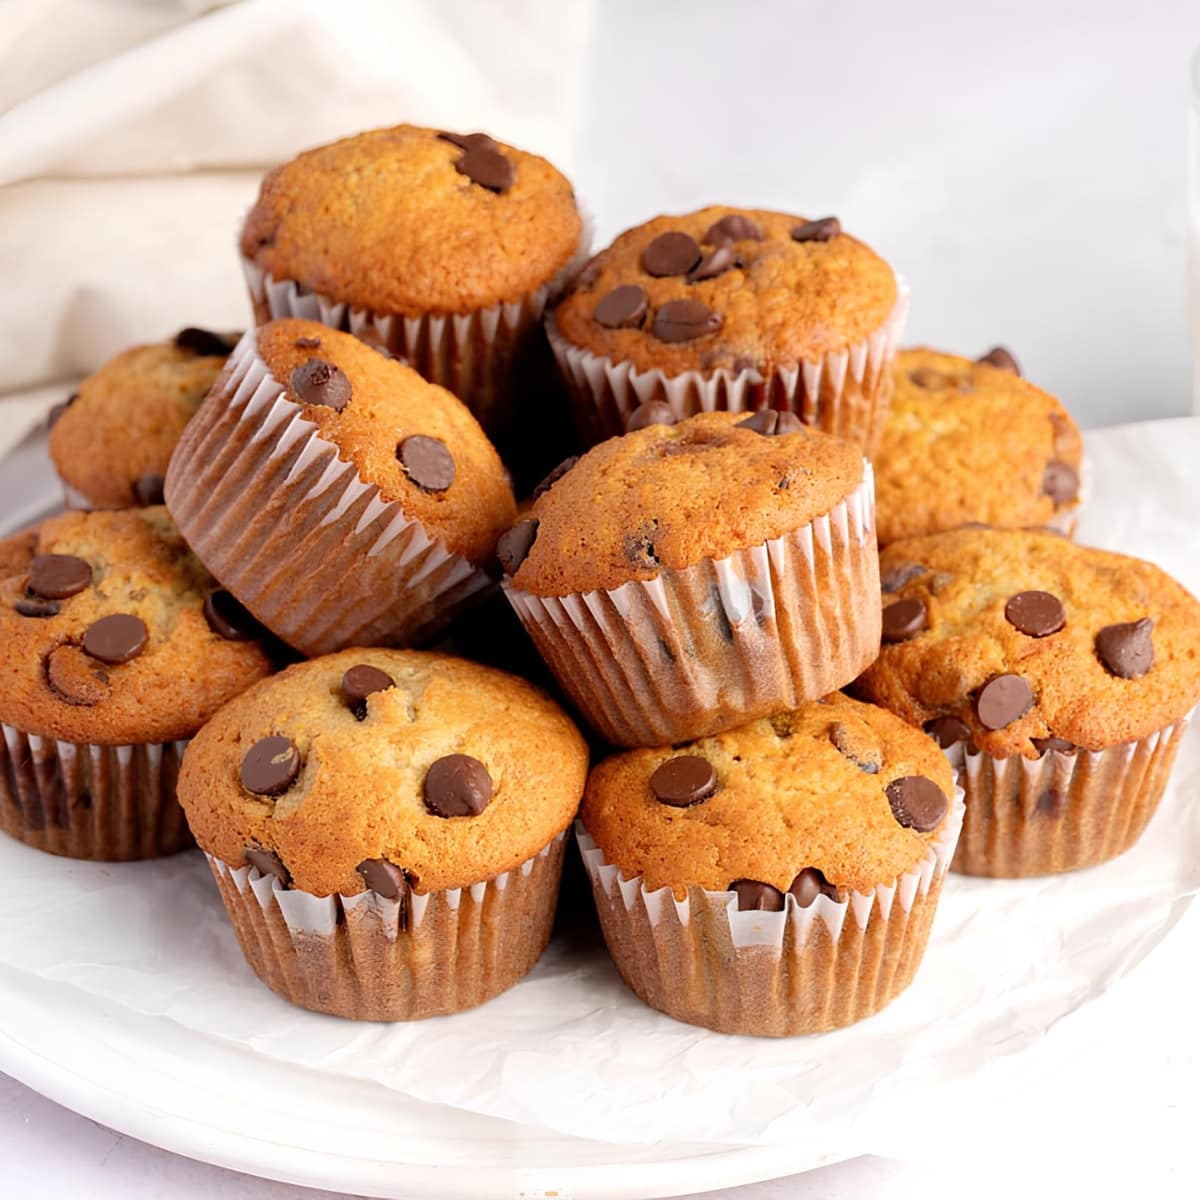 Banana Chocolate Chip Muffins in Plate